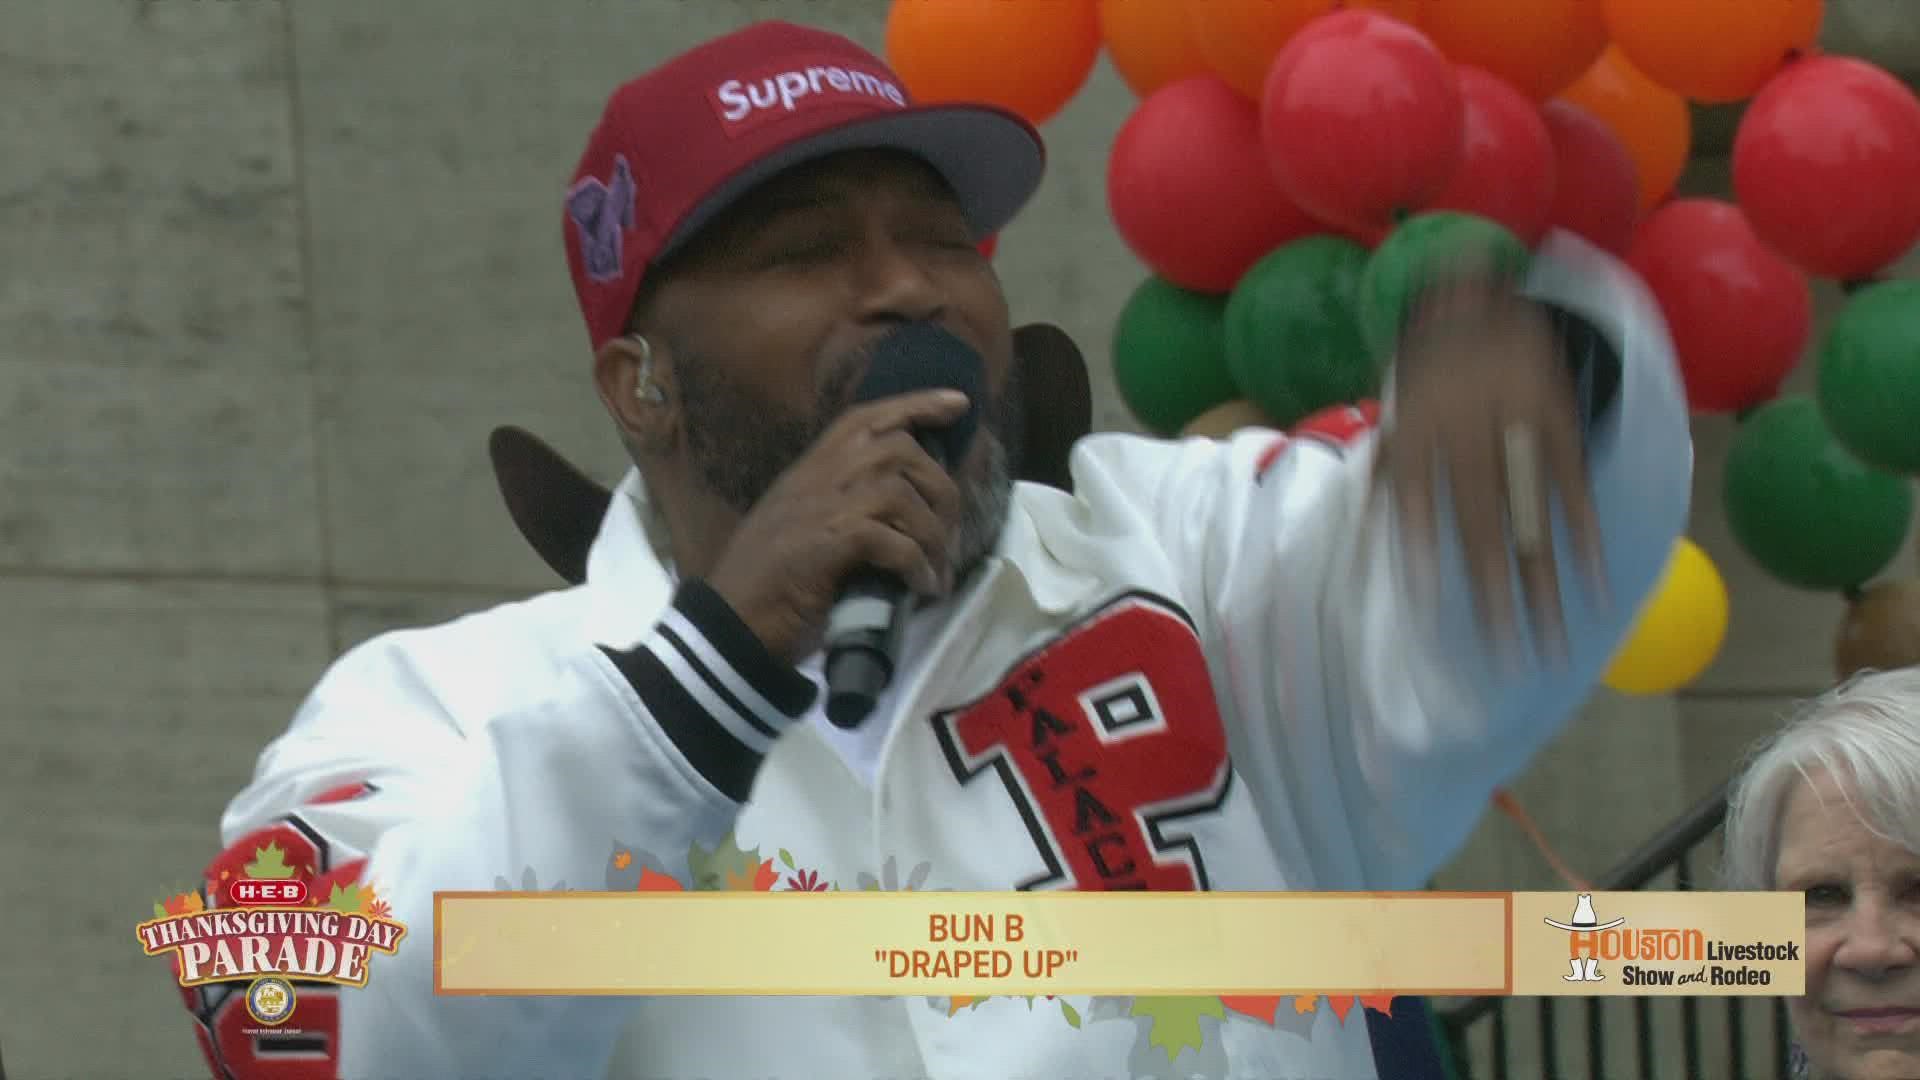 H-Town's own performed one of his hits for the crowd at the 73rd annual parade in downtown Houston.